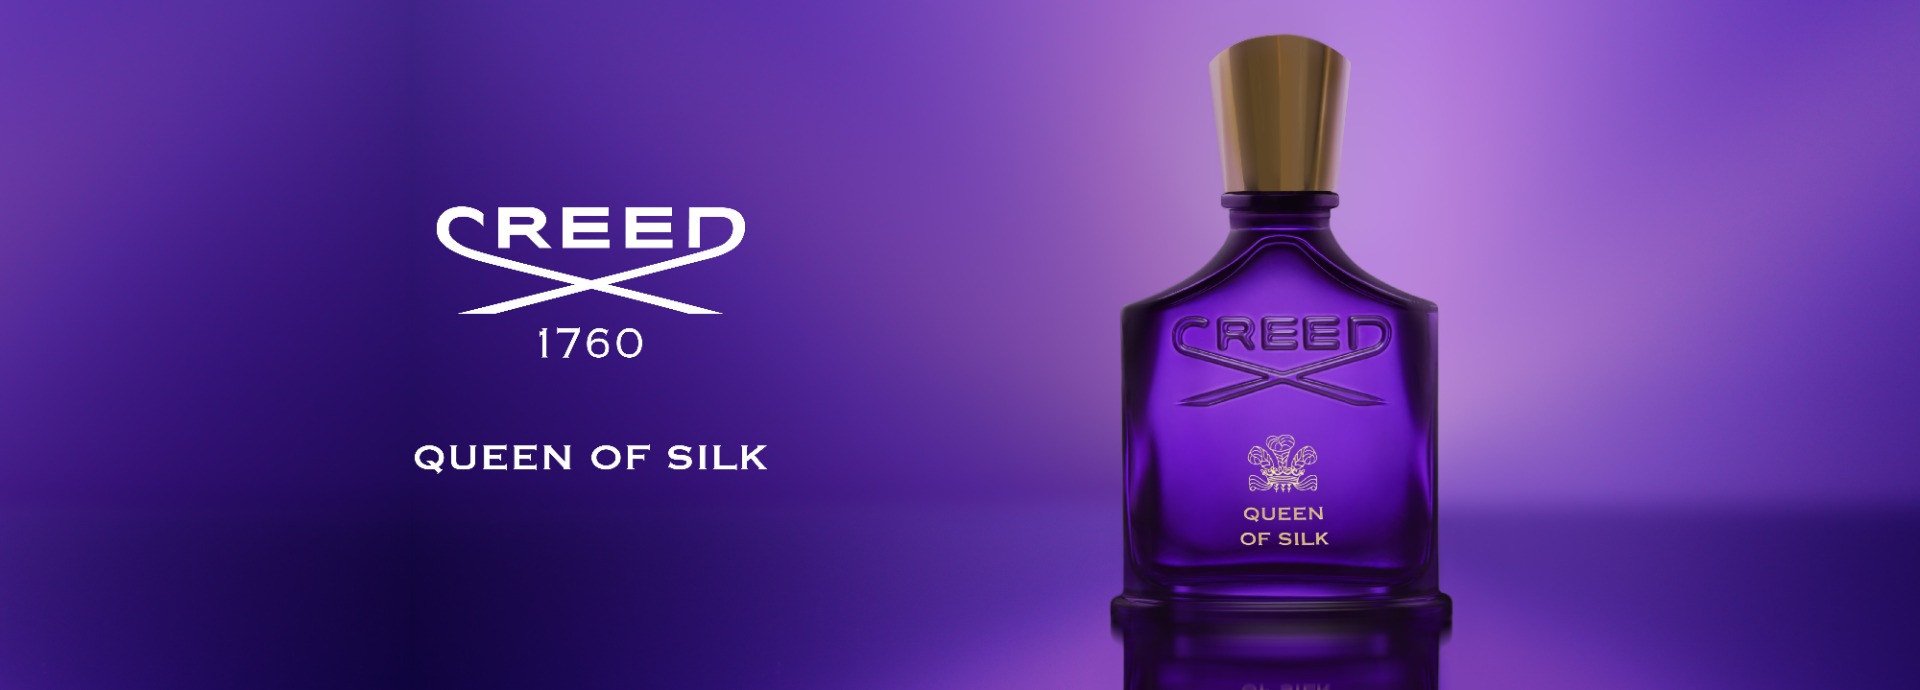 Creed Queen of Silk